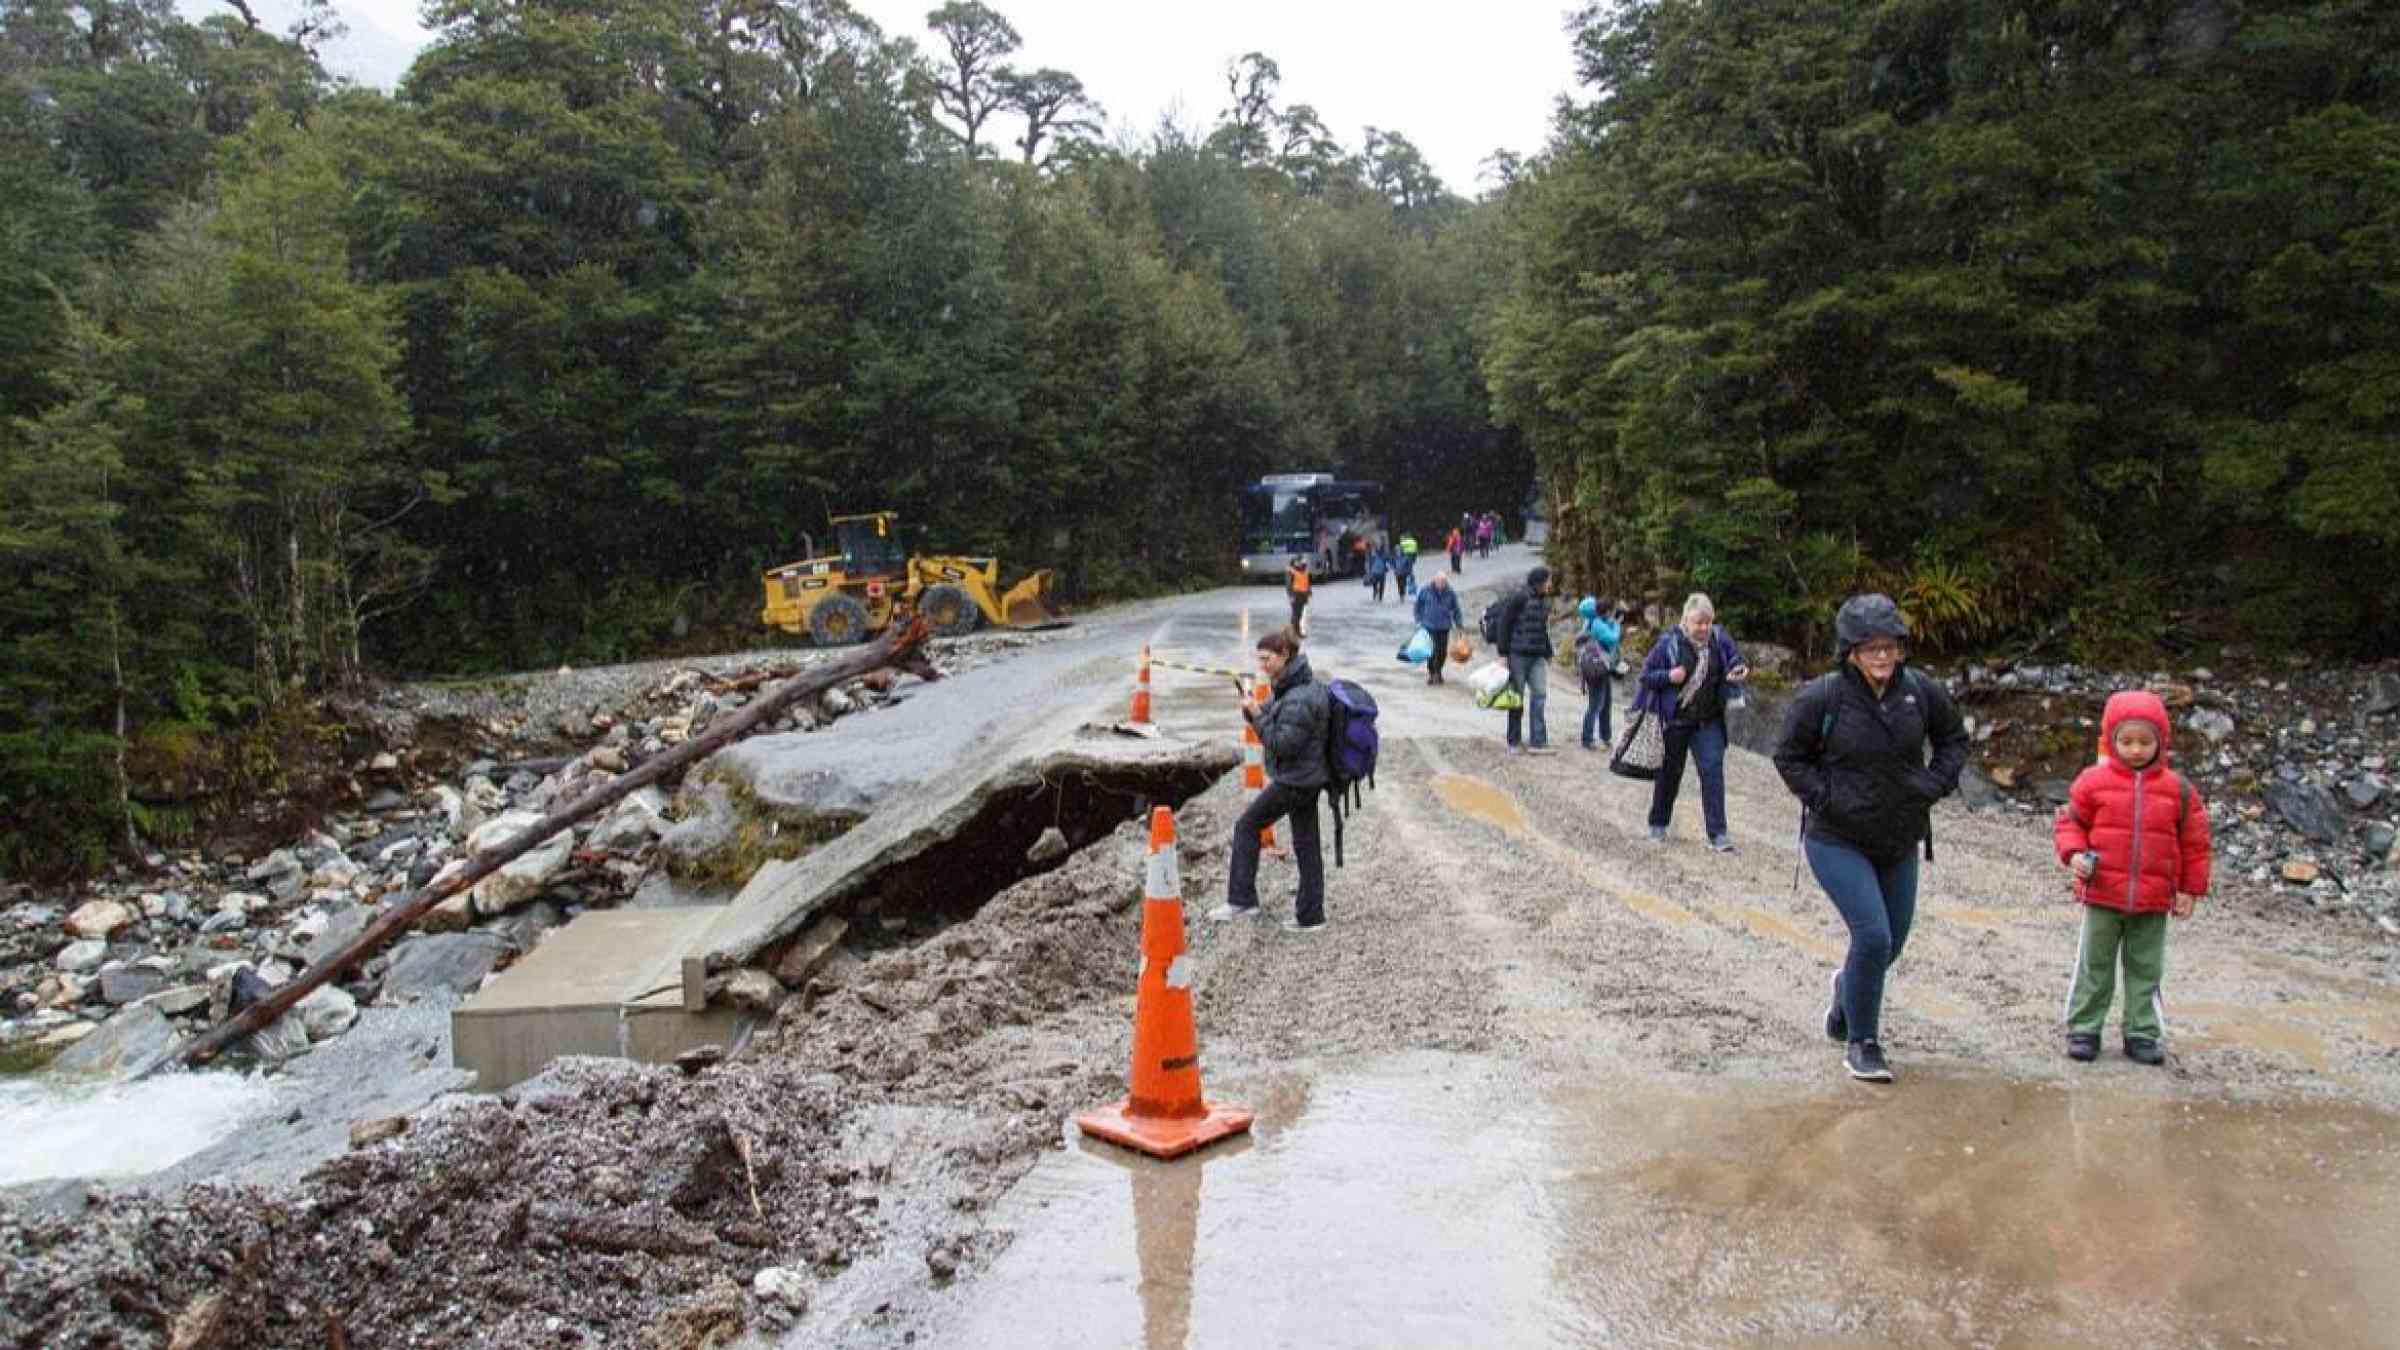 Tourists traverse the side of a road eroded by floods in Doubtful Sound, New Zealand